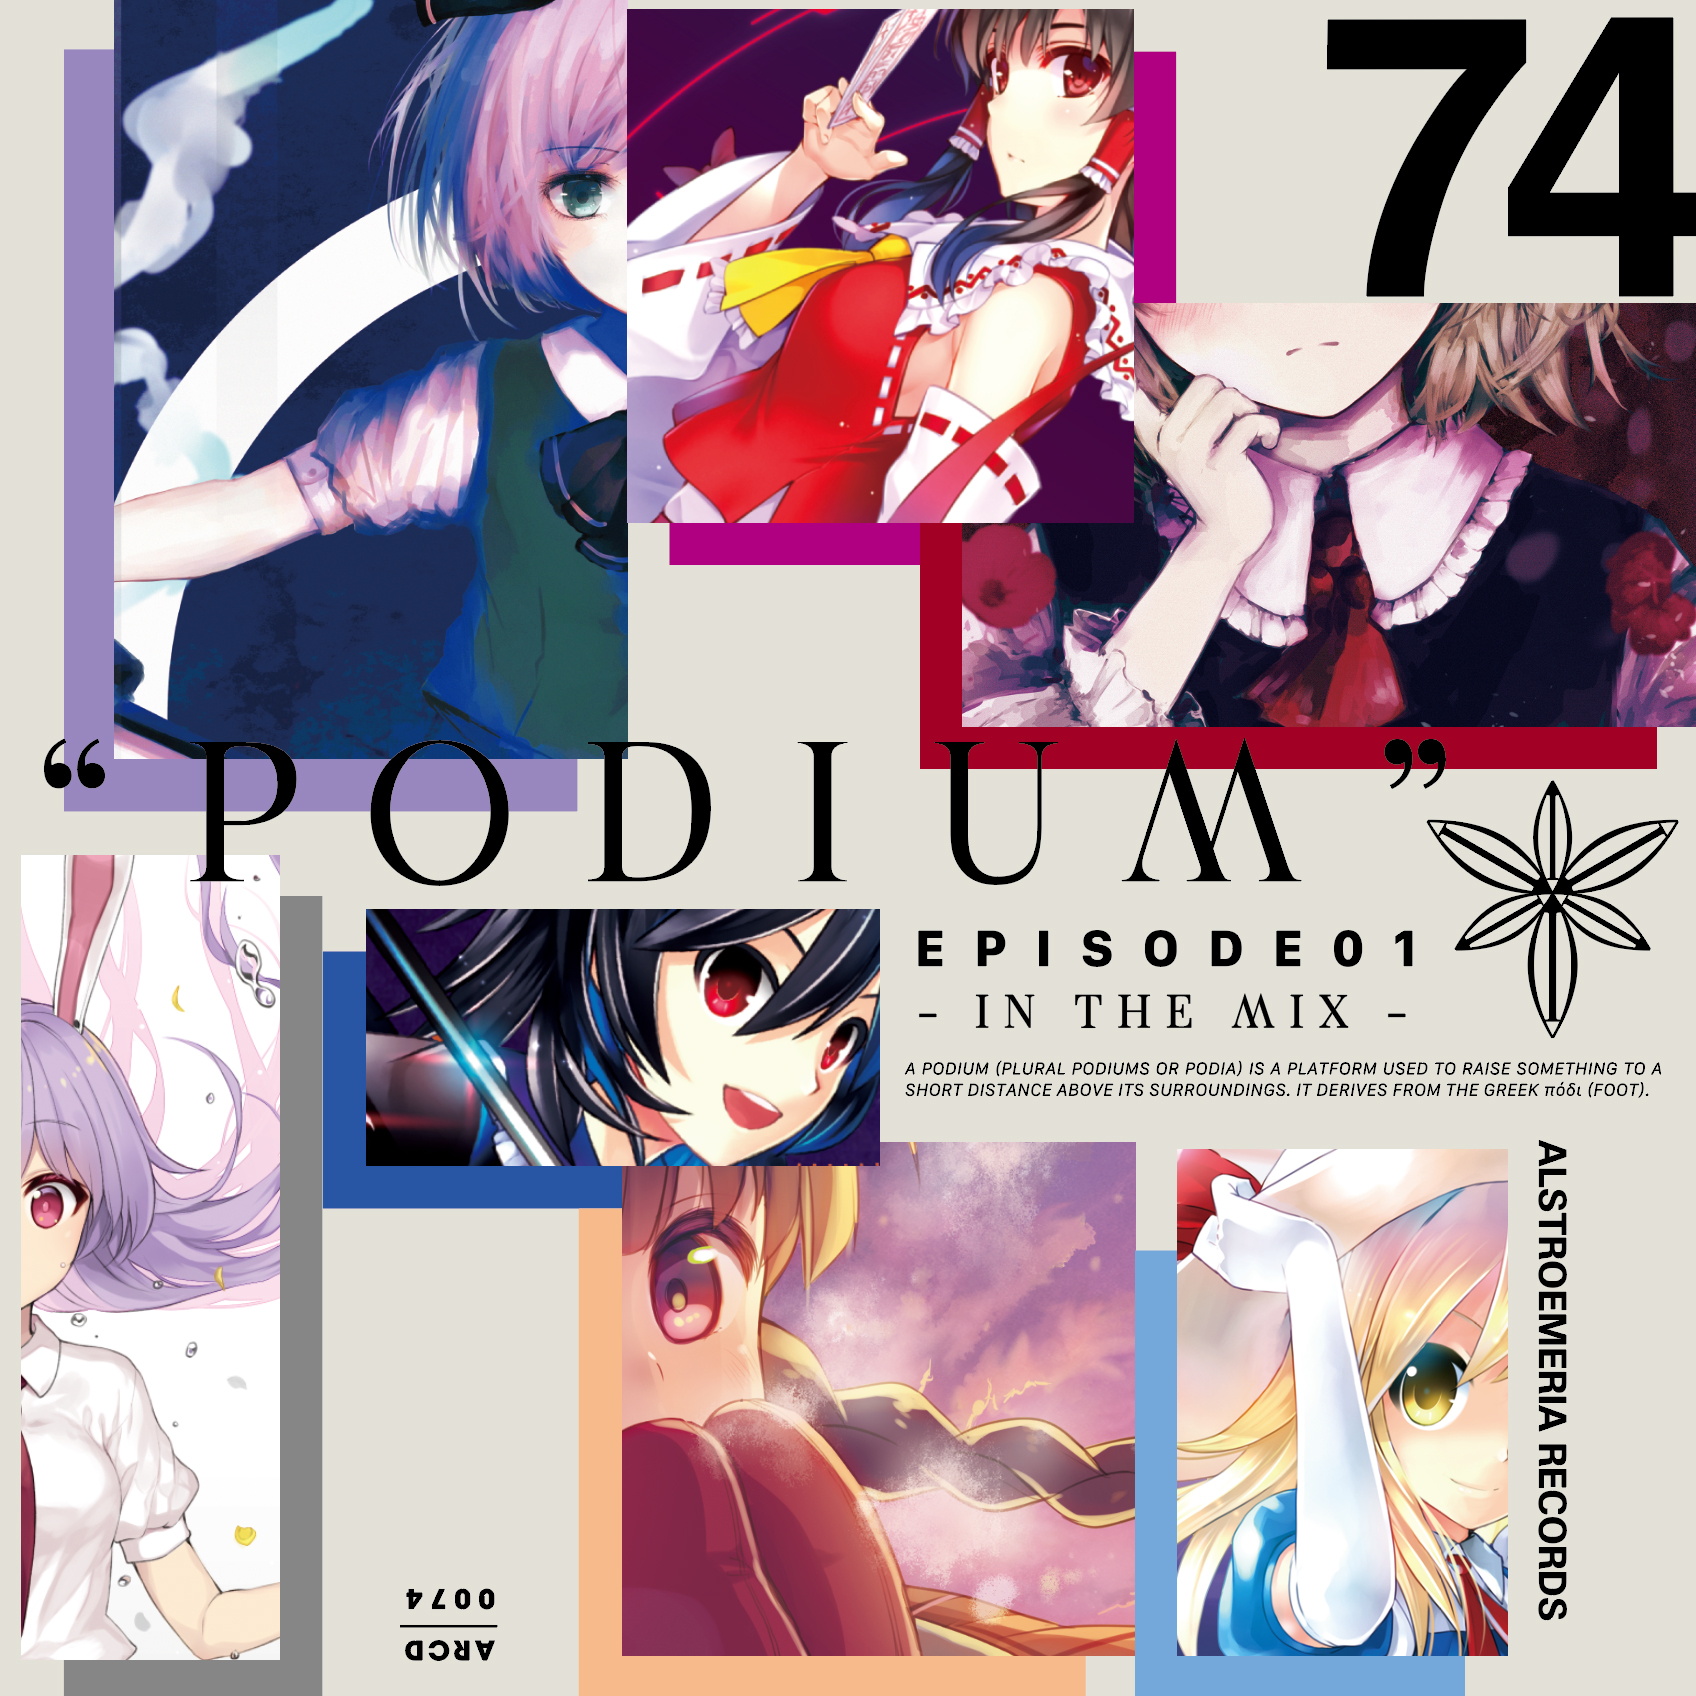 ARCD0074 “PODIUM” EPISODE 1 -IN THE MIX-